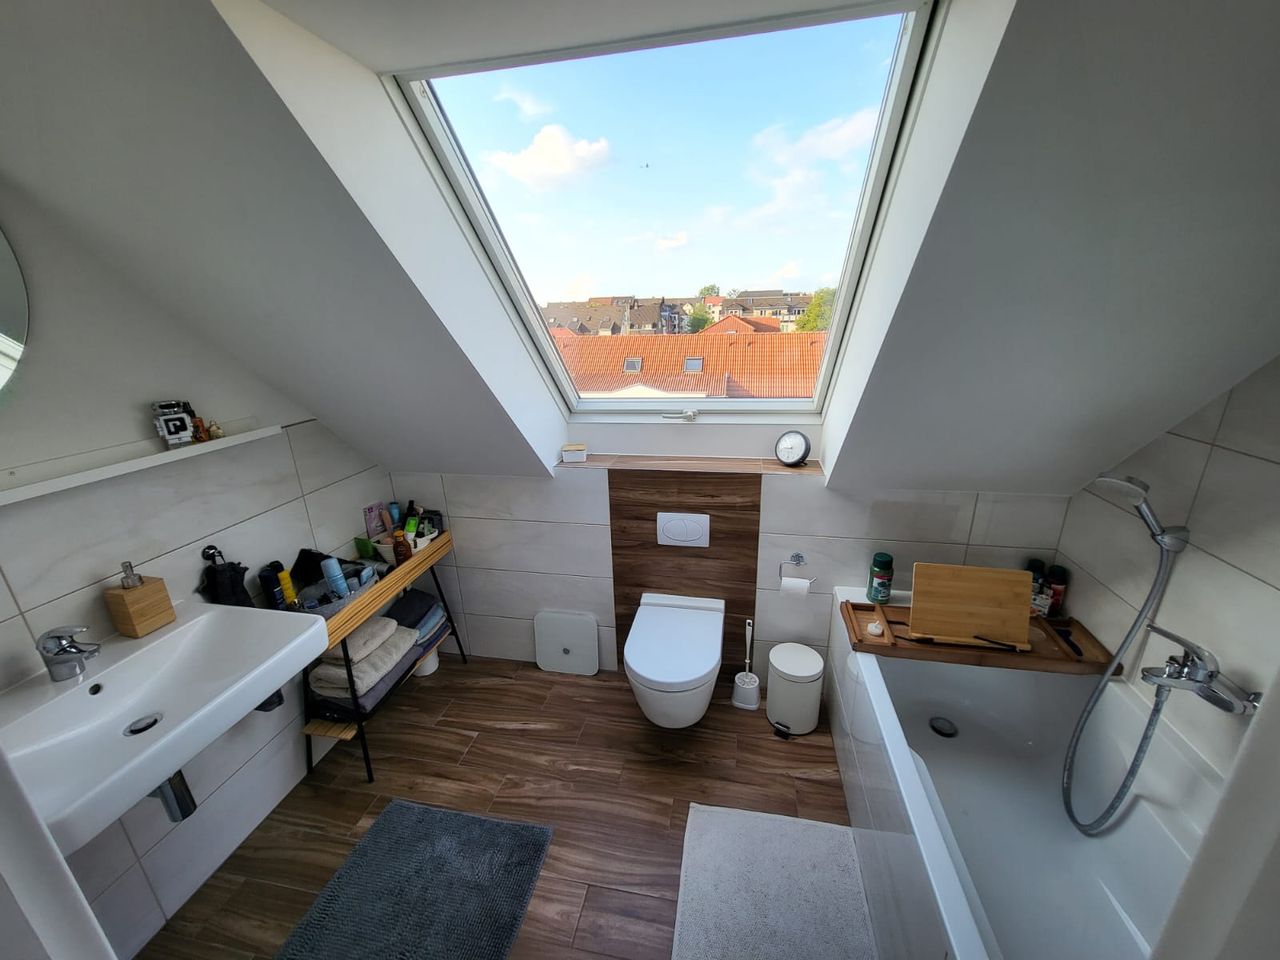 Exclusive 3-room maisonette apartment with rooftop terrace in the heart of Cologne-Ehrenfeld